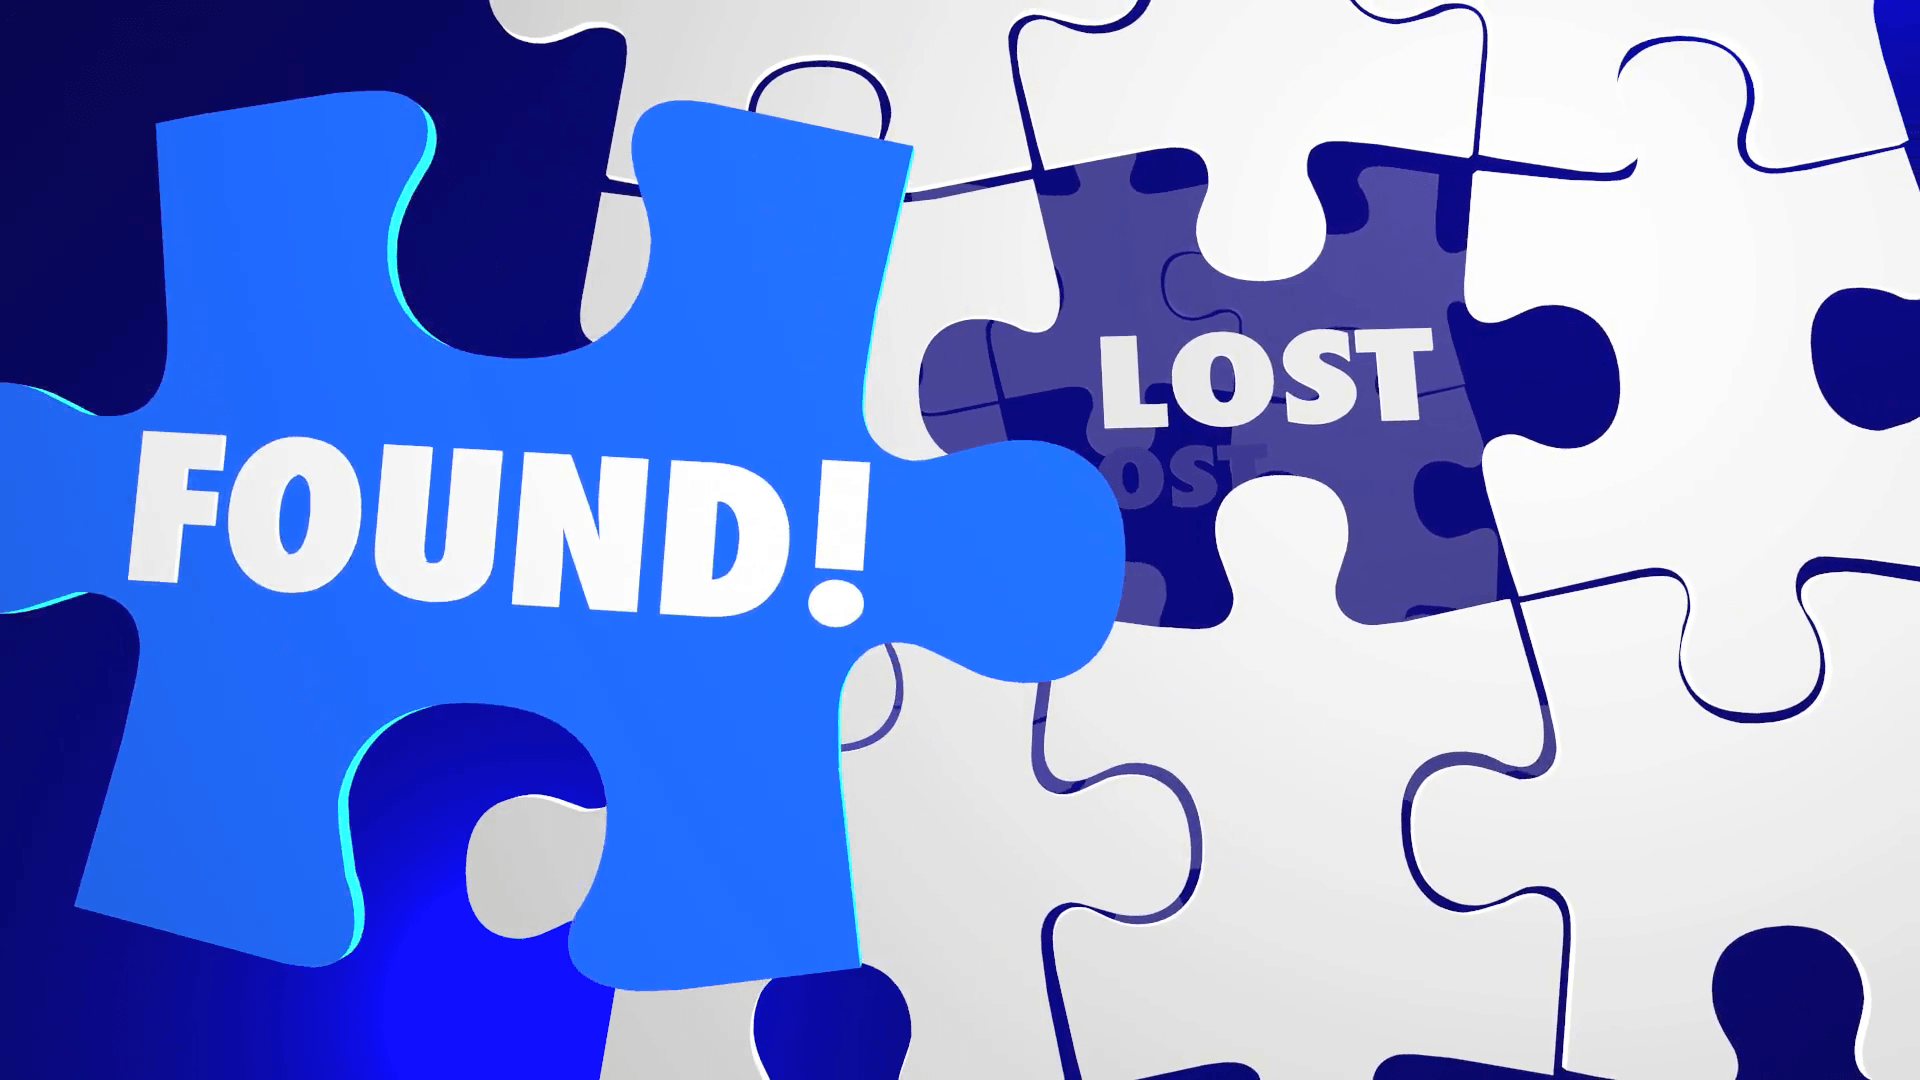 Lost and Found Puzzle Piece Locate Misplaced 3D Animation